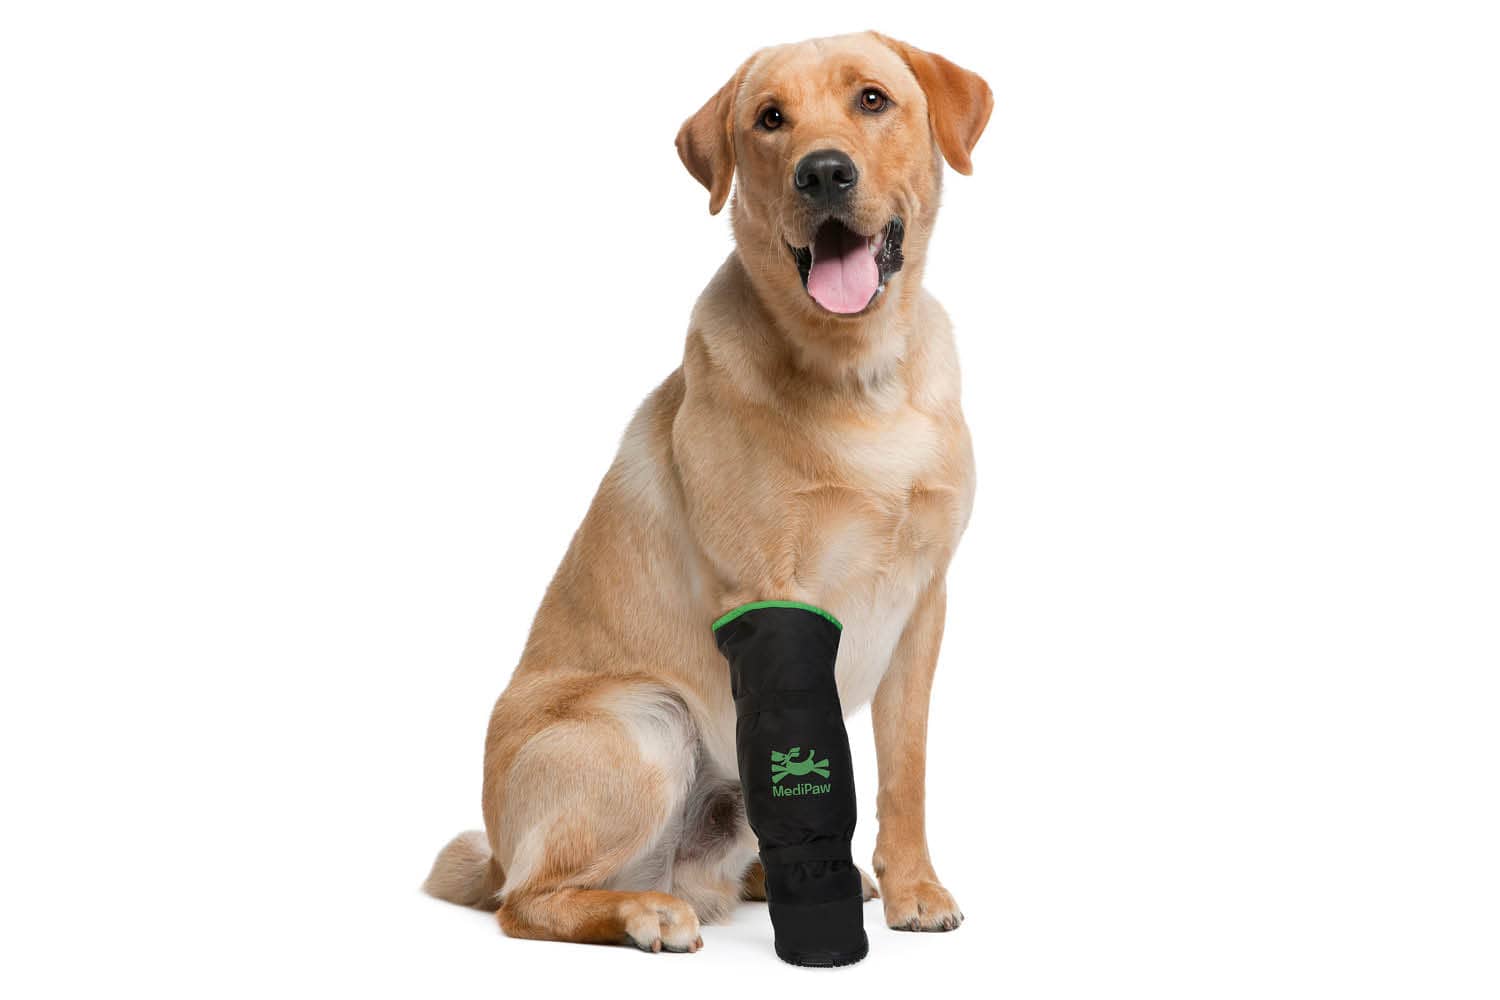 Yellow lab wearing x-boot on paw